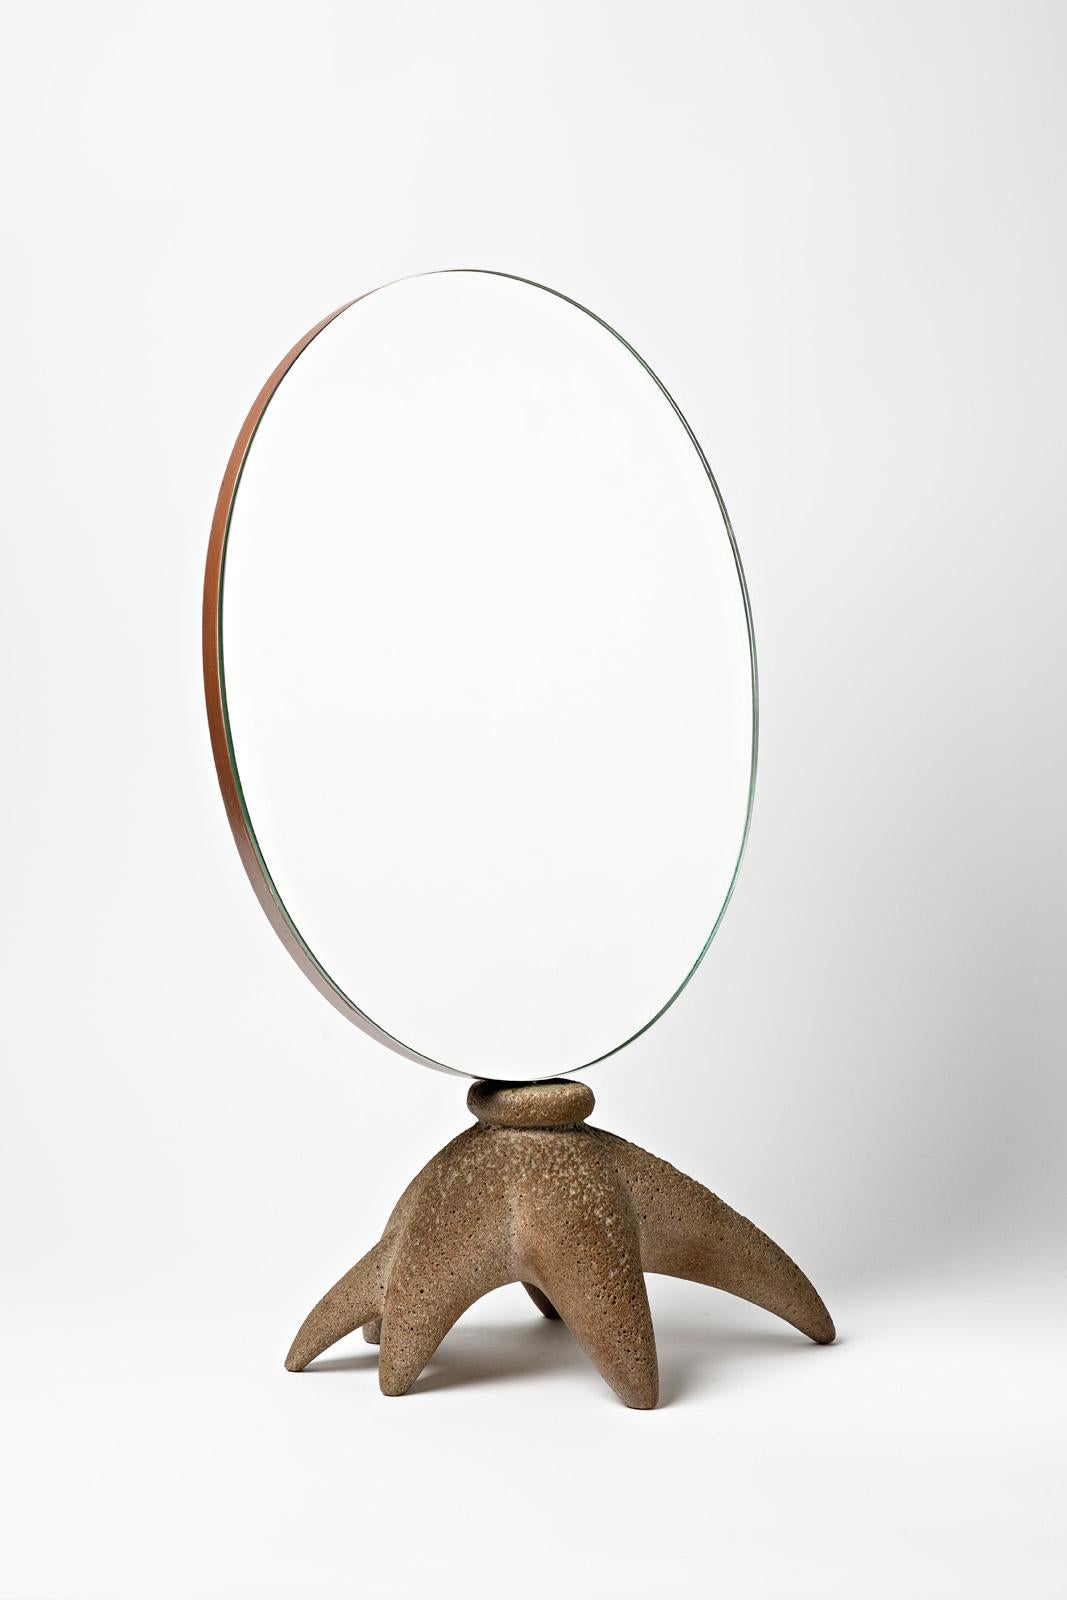 In the style of Garouste et Bonetti

Pair of large table mirrors realised circa 1980

Resin mirror base

Original 20th century decoration 

Height 58
Large 35 cm
Depth 20 cm